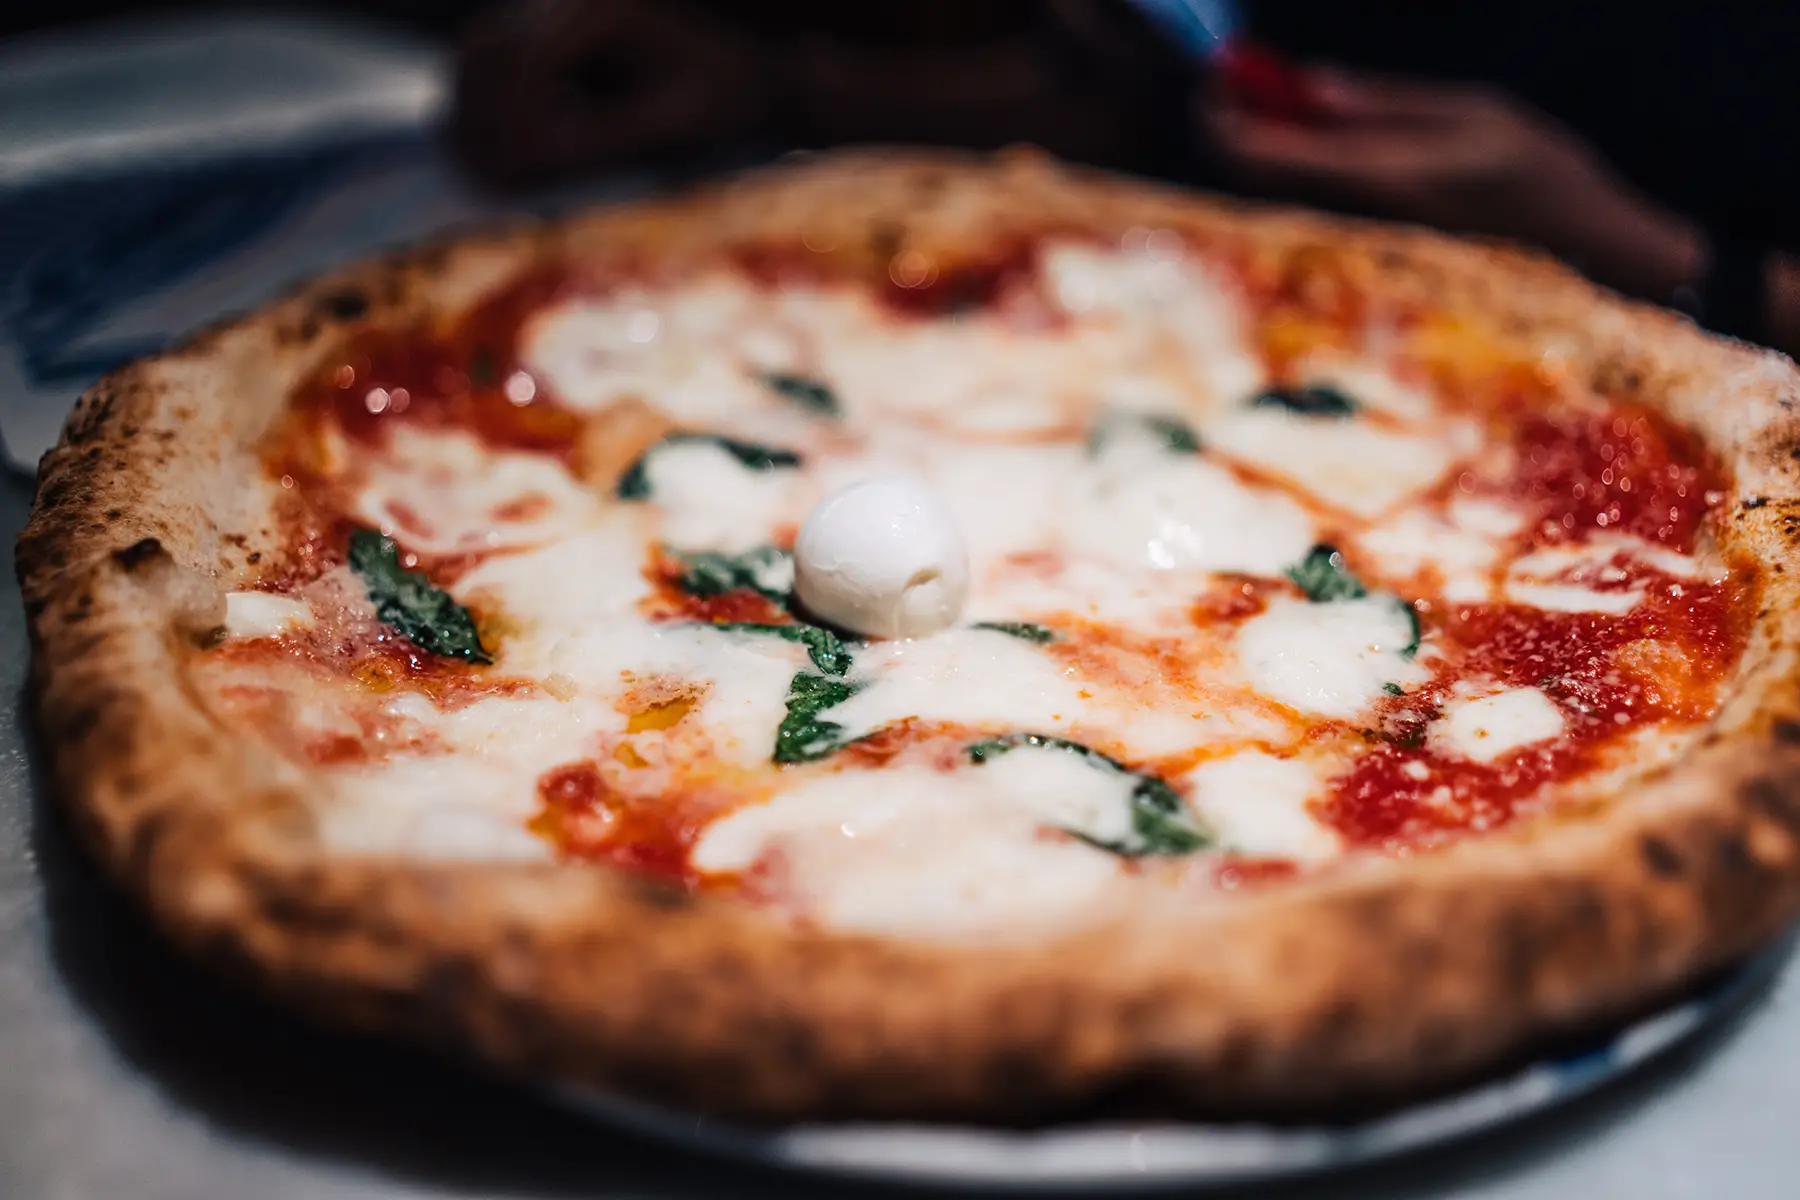 Pizza Napoletana – a pizza with tomato sauce, melted mozerella, and wilted basil leaves